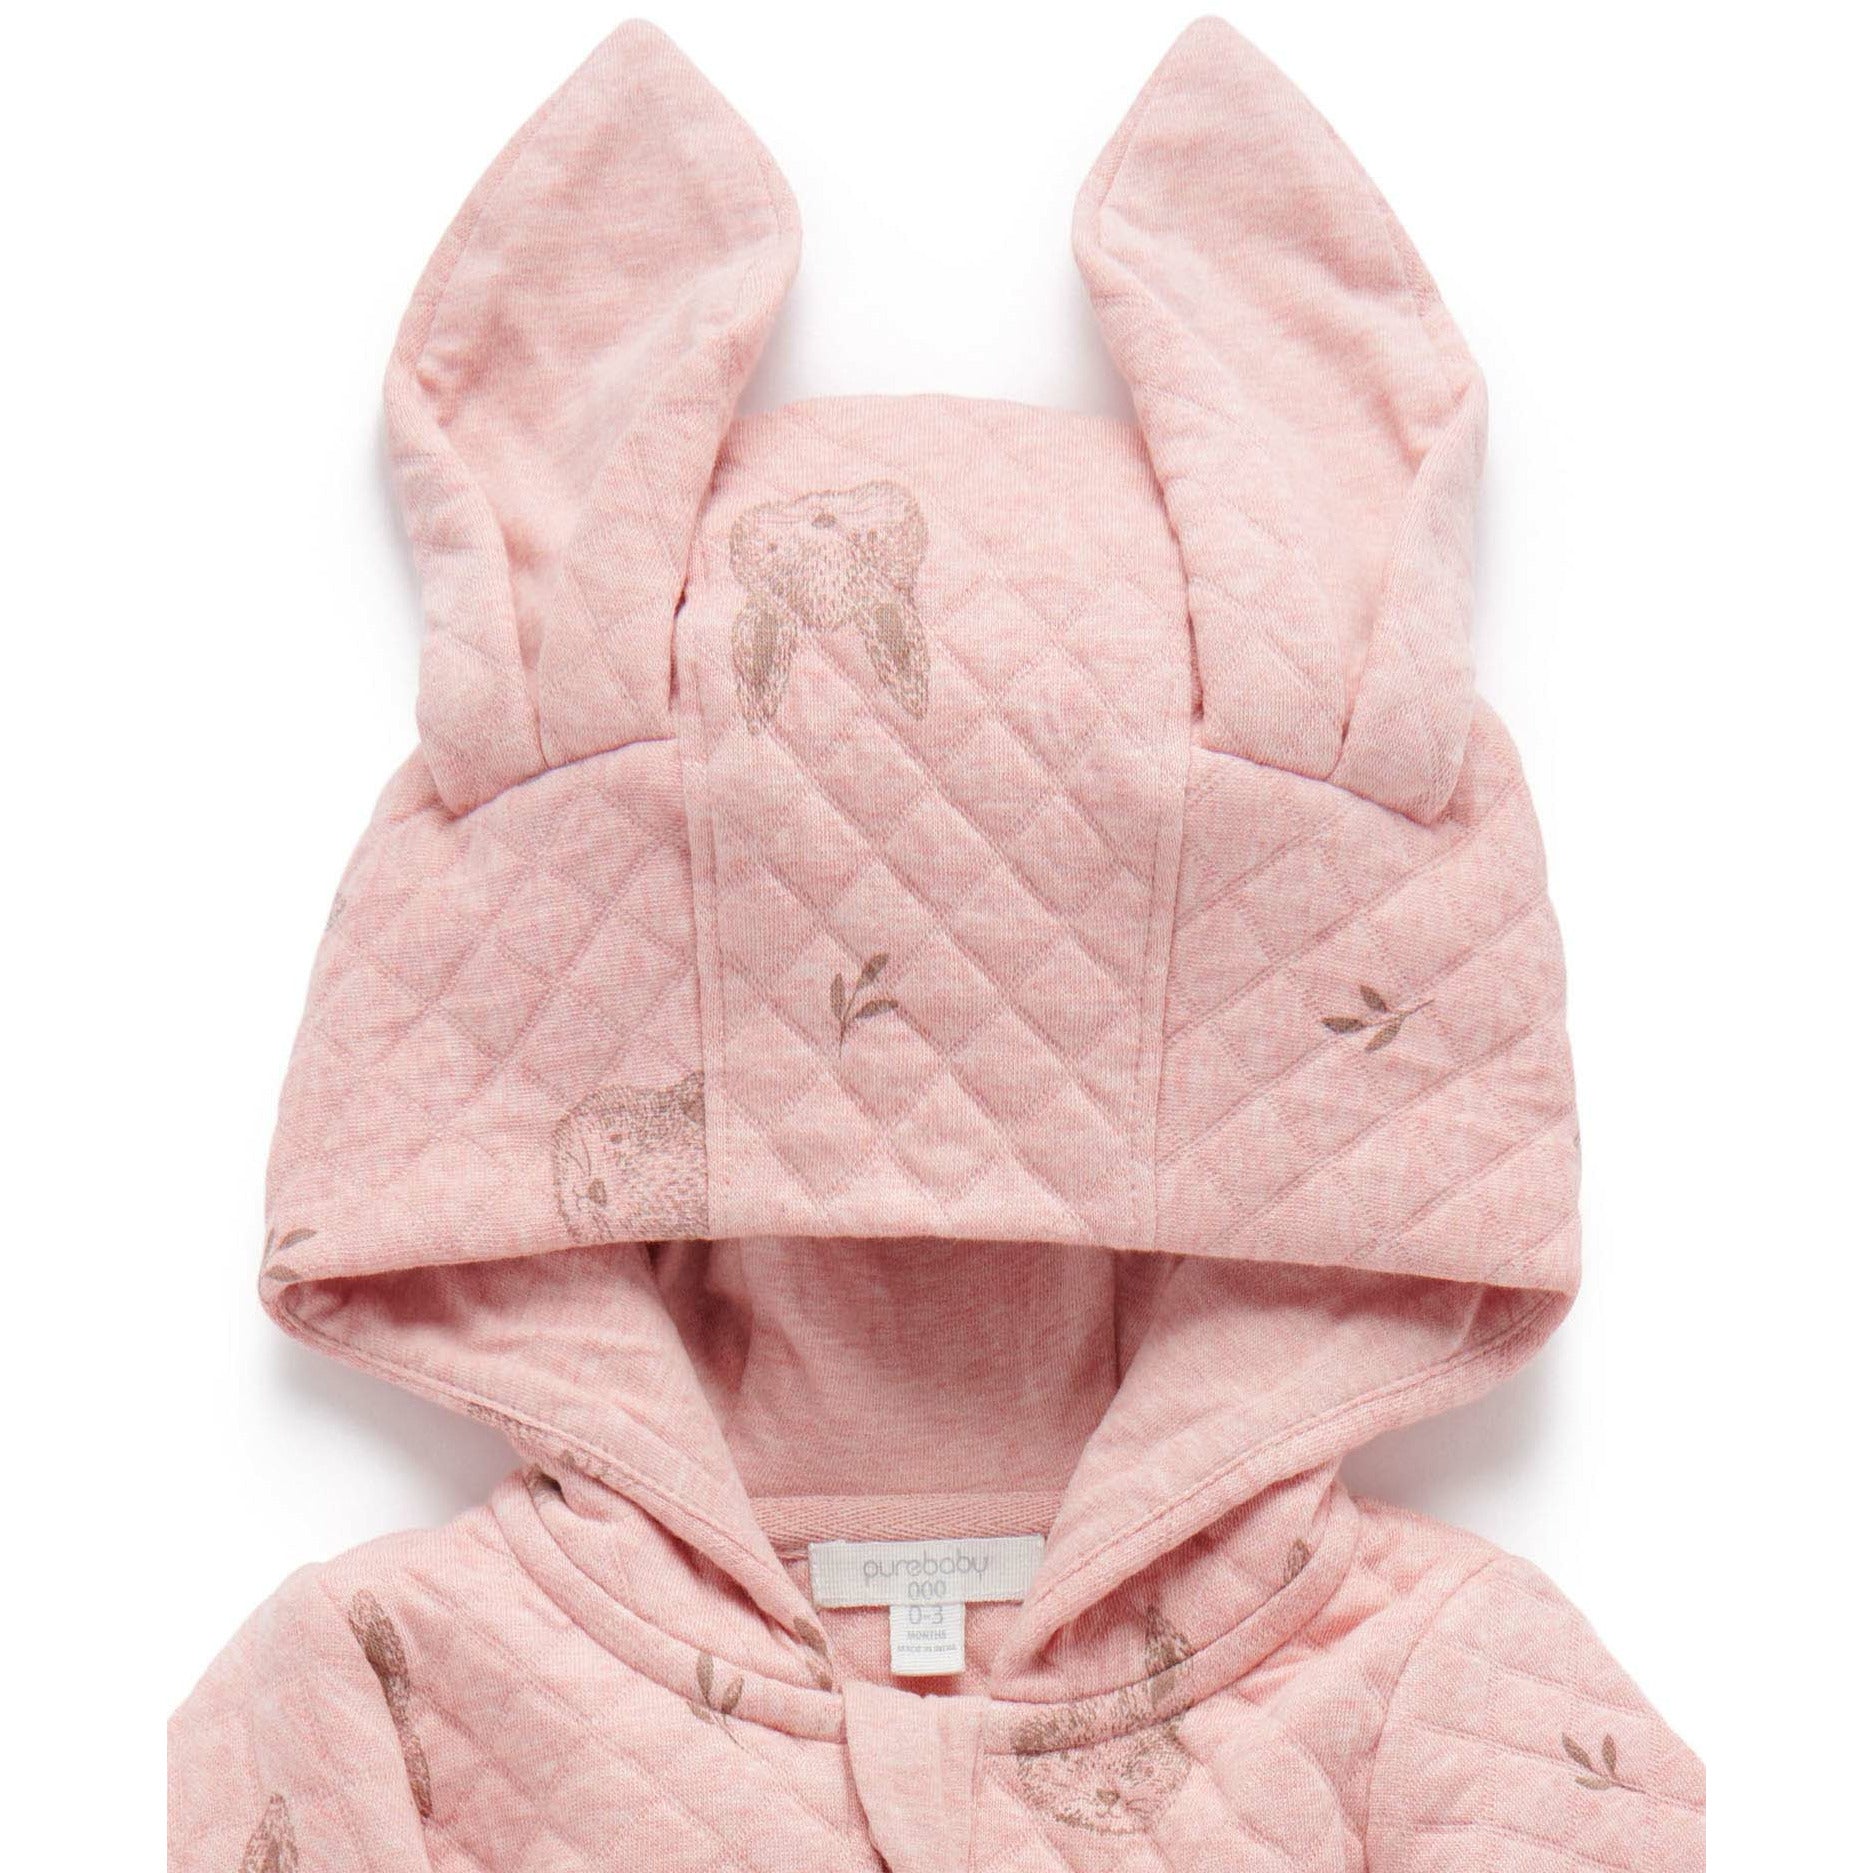 Bunny Quilted Growsuit - Happy Bunny Print